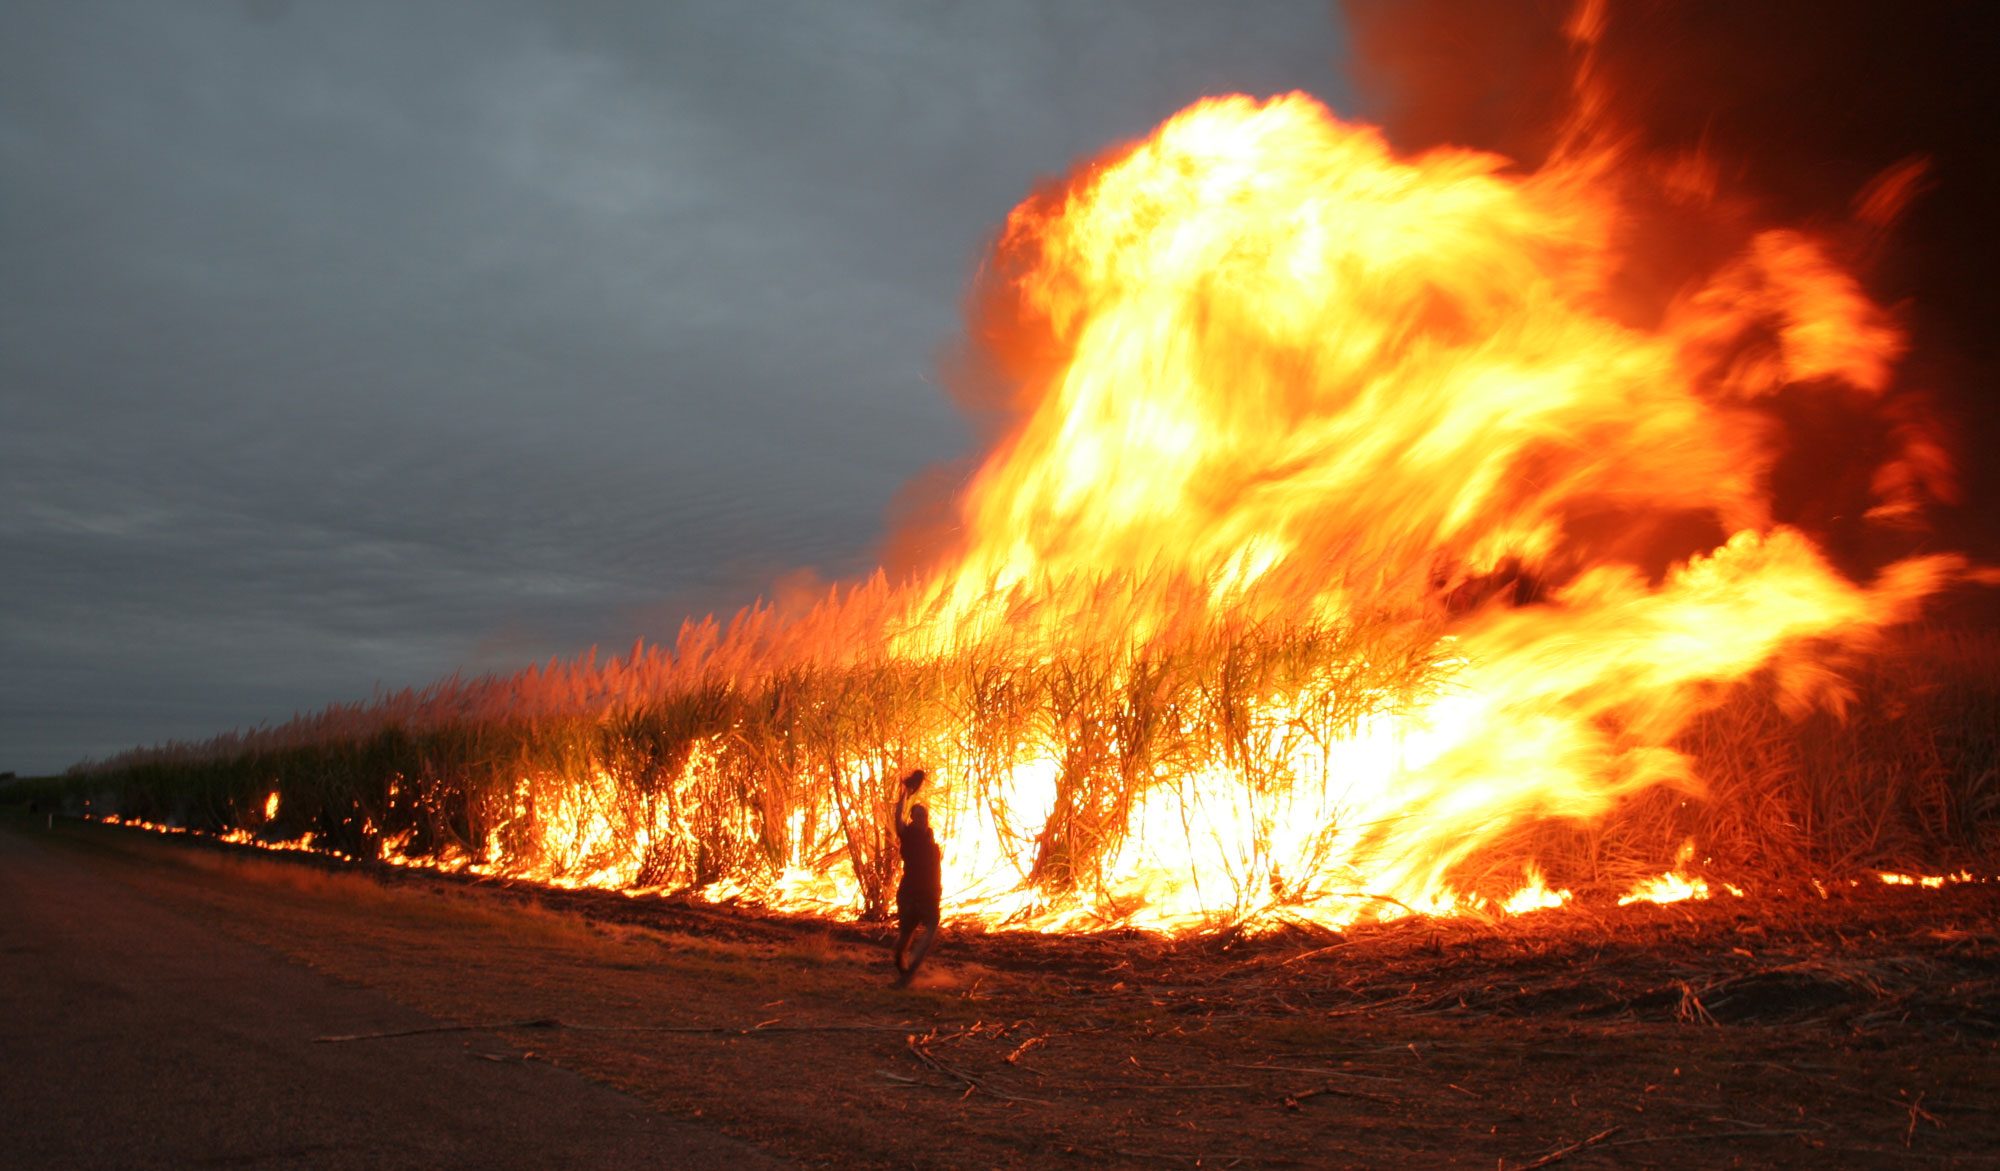 Photograph of a field of sugarcane being burned, apparently at dusk. The photo shows tall flames towering above a burning field of sugarcane. The silhouette of a person can be seen in front of the burning field. The person is standing and raising something, perhaps a hat, above their head.